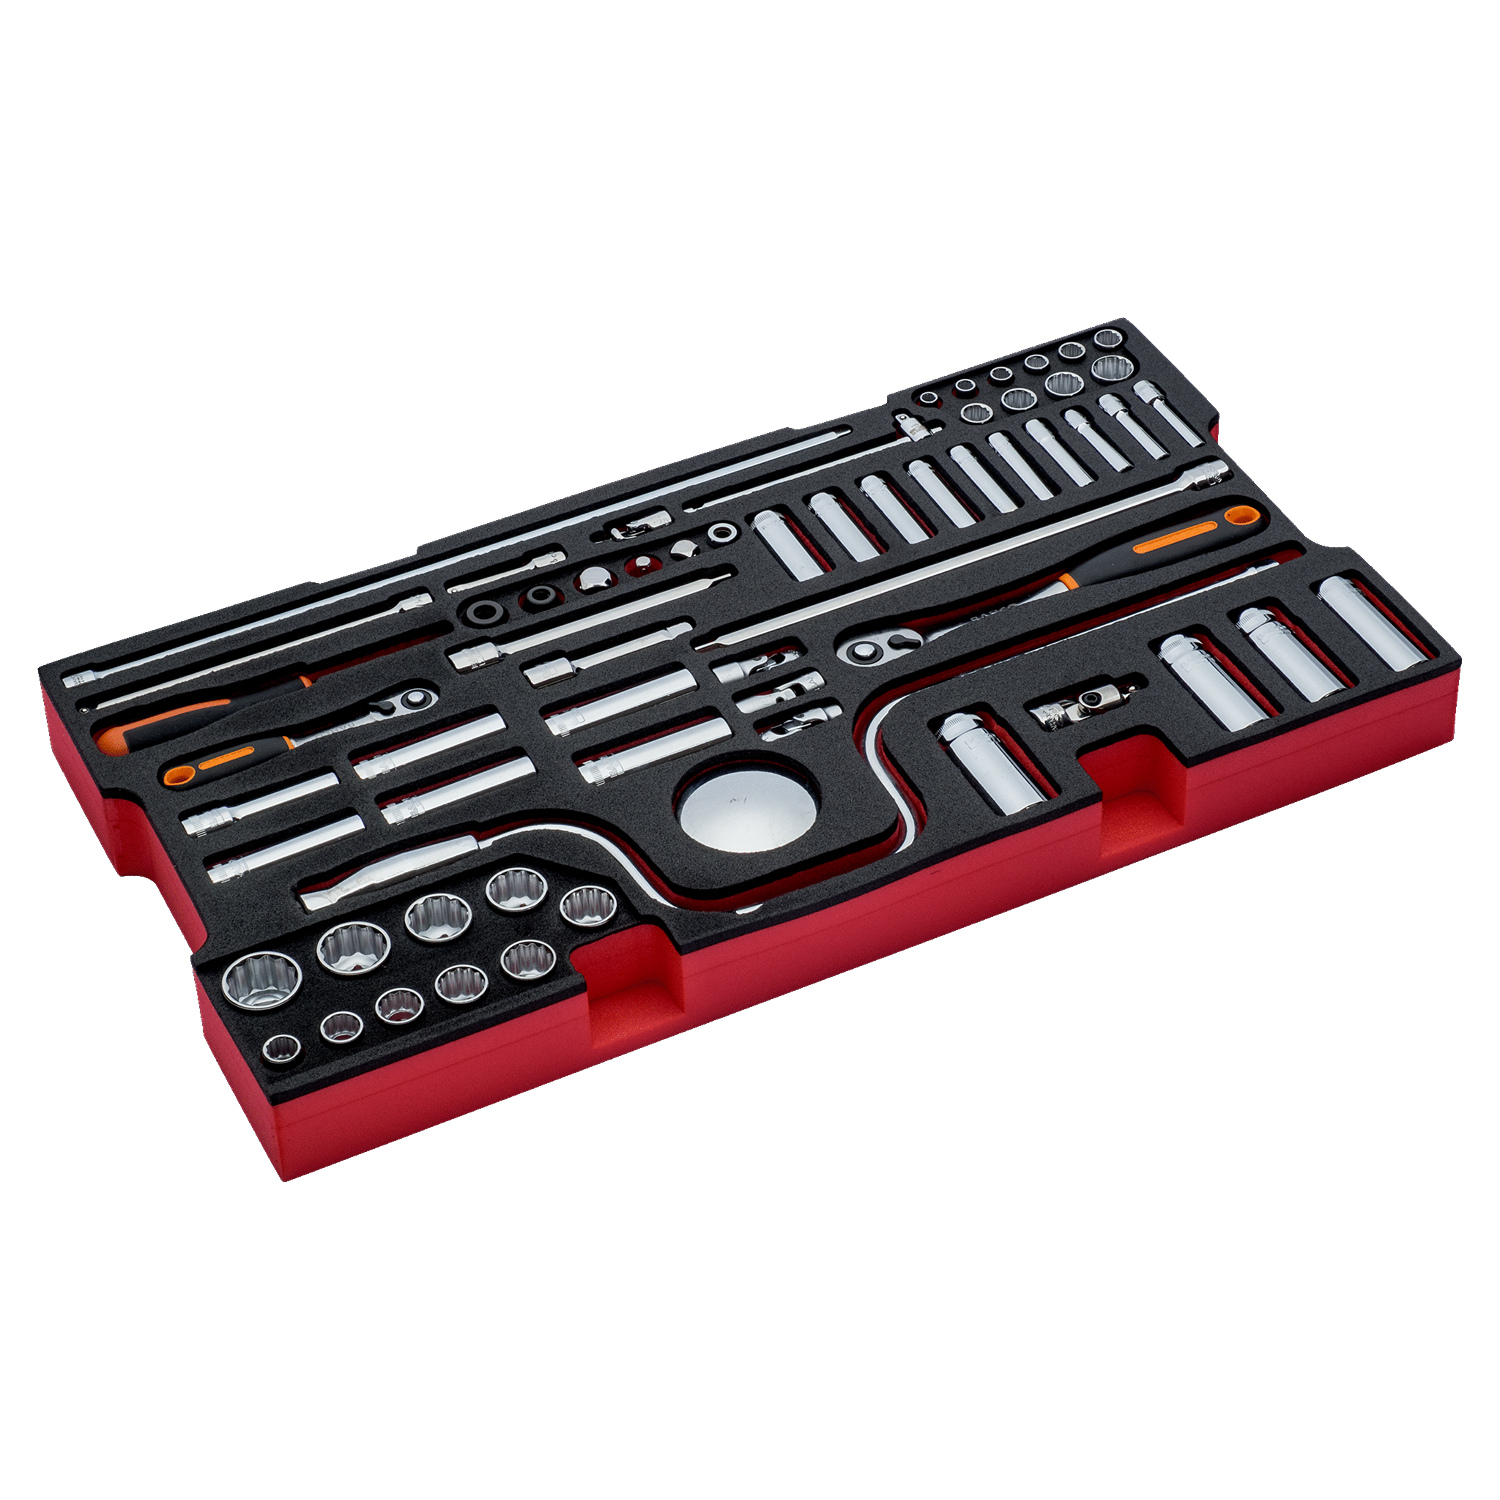 BAHCO FF2B07 Foam Inlay Socket and Wrench Set for Rigid Case - Premium Socket and Wrench Set from BAHCO - Shop now at Yew Aik.